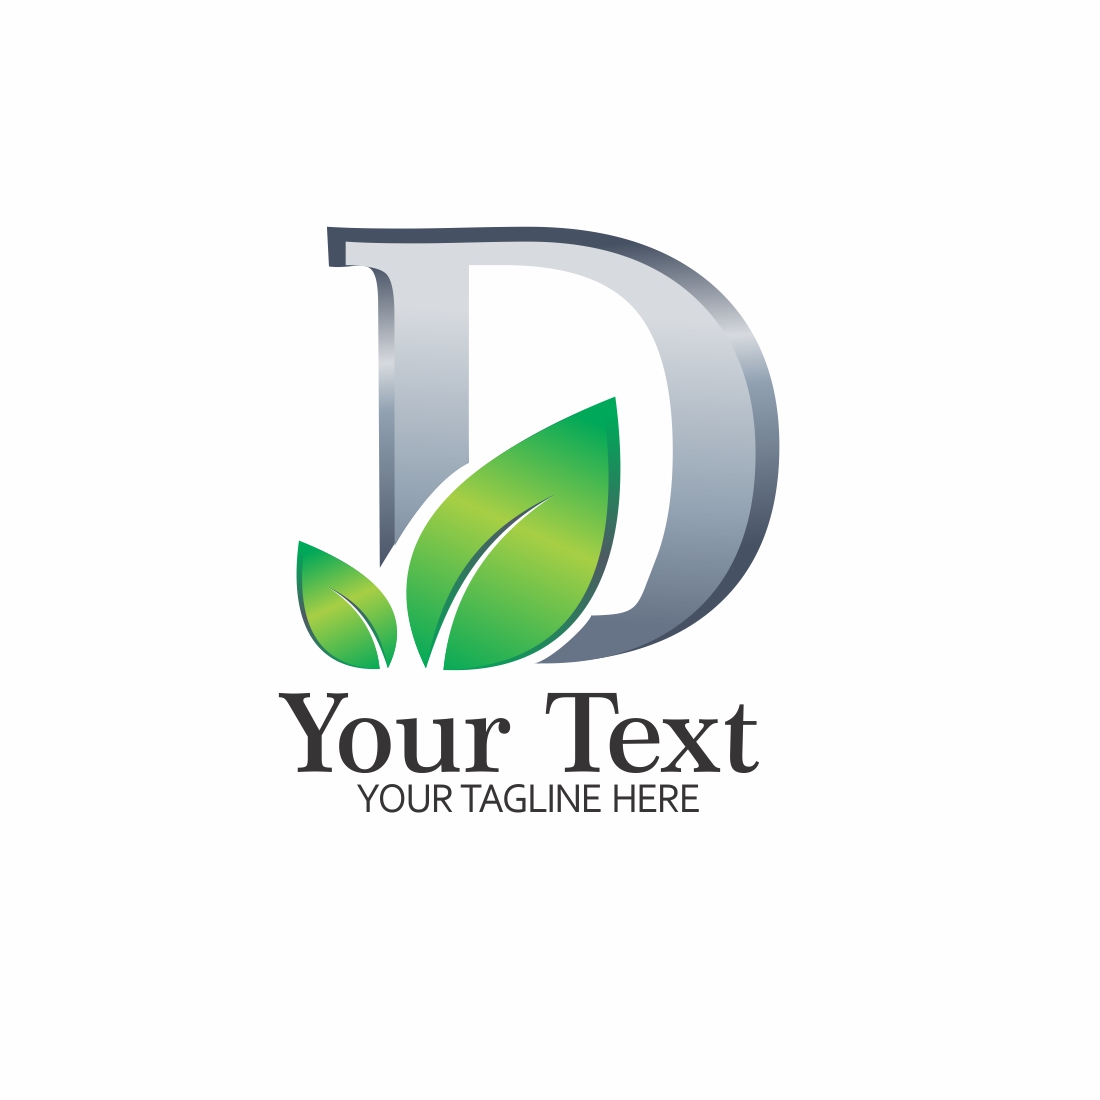 Attractive Letter D logo Designs in Two Variant Color cover image.